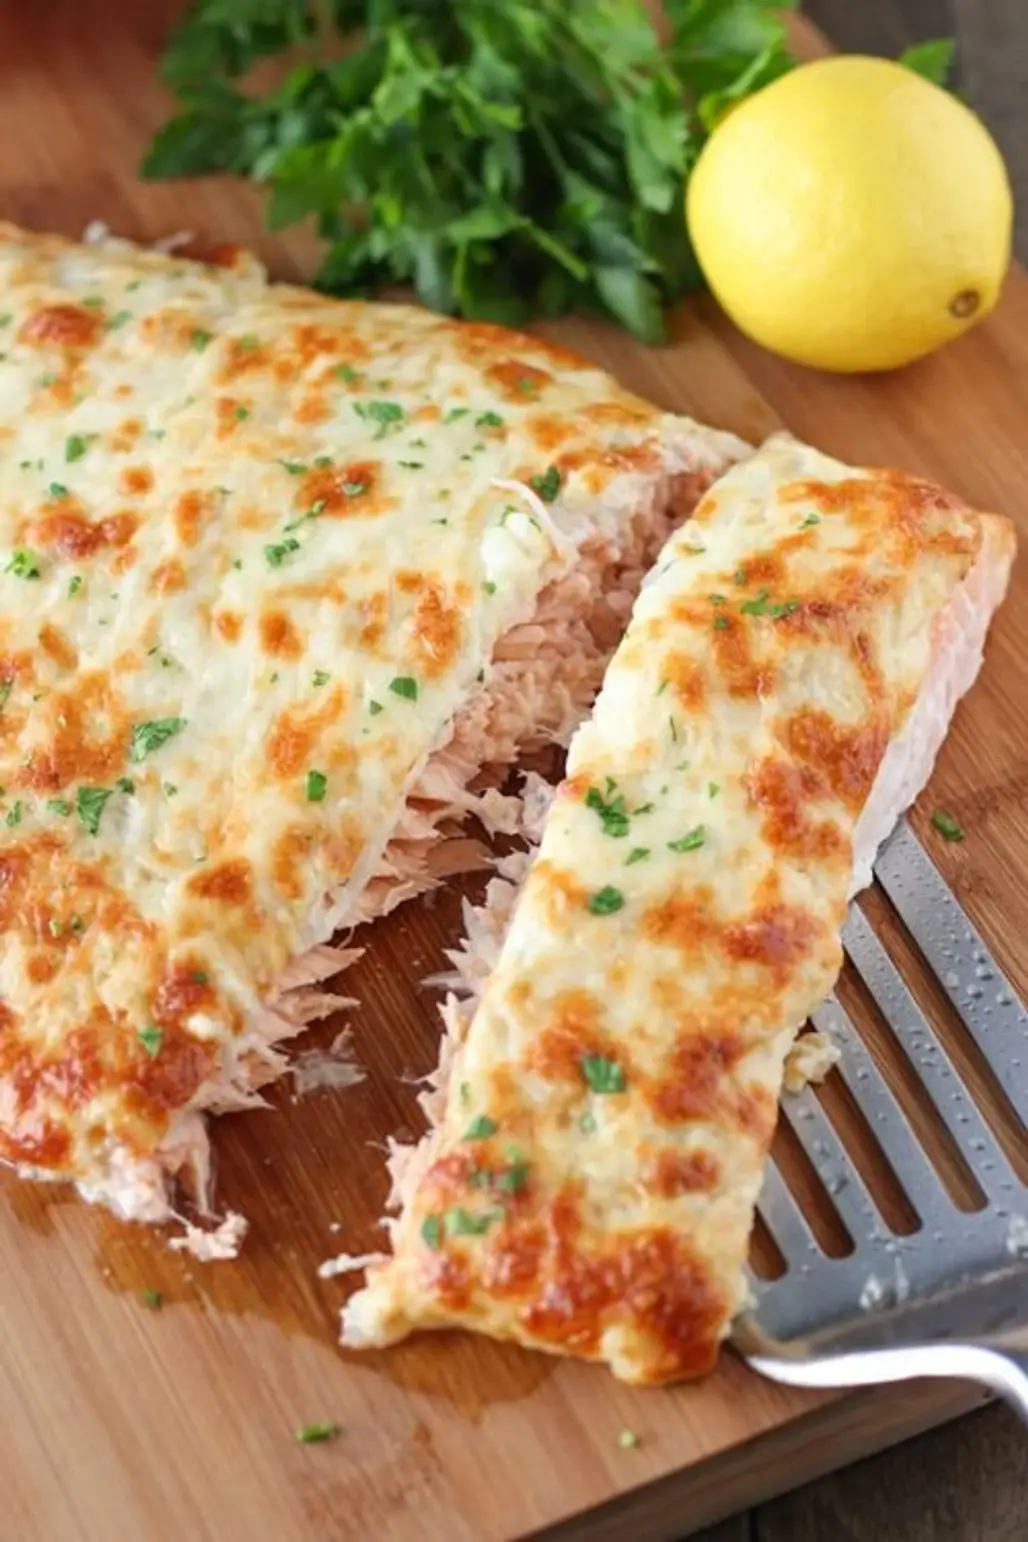 Cheesy, Onion Crusted Baked Salmon